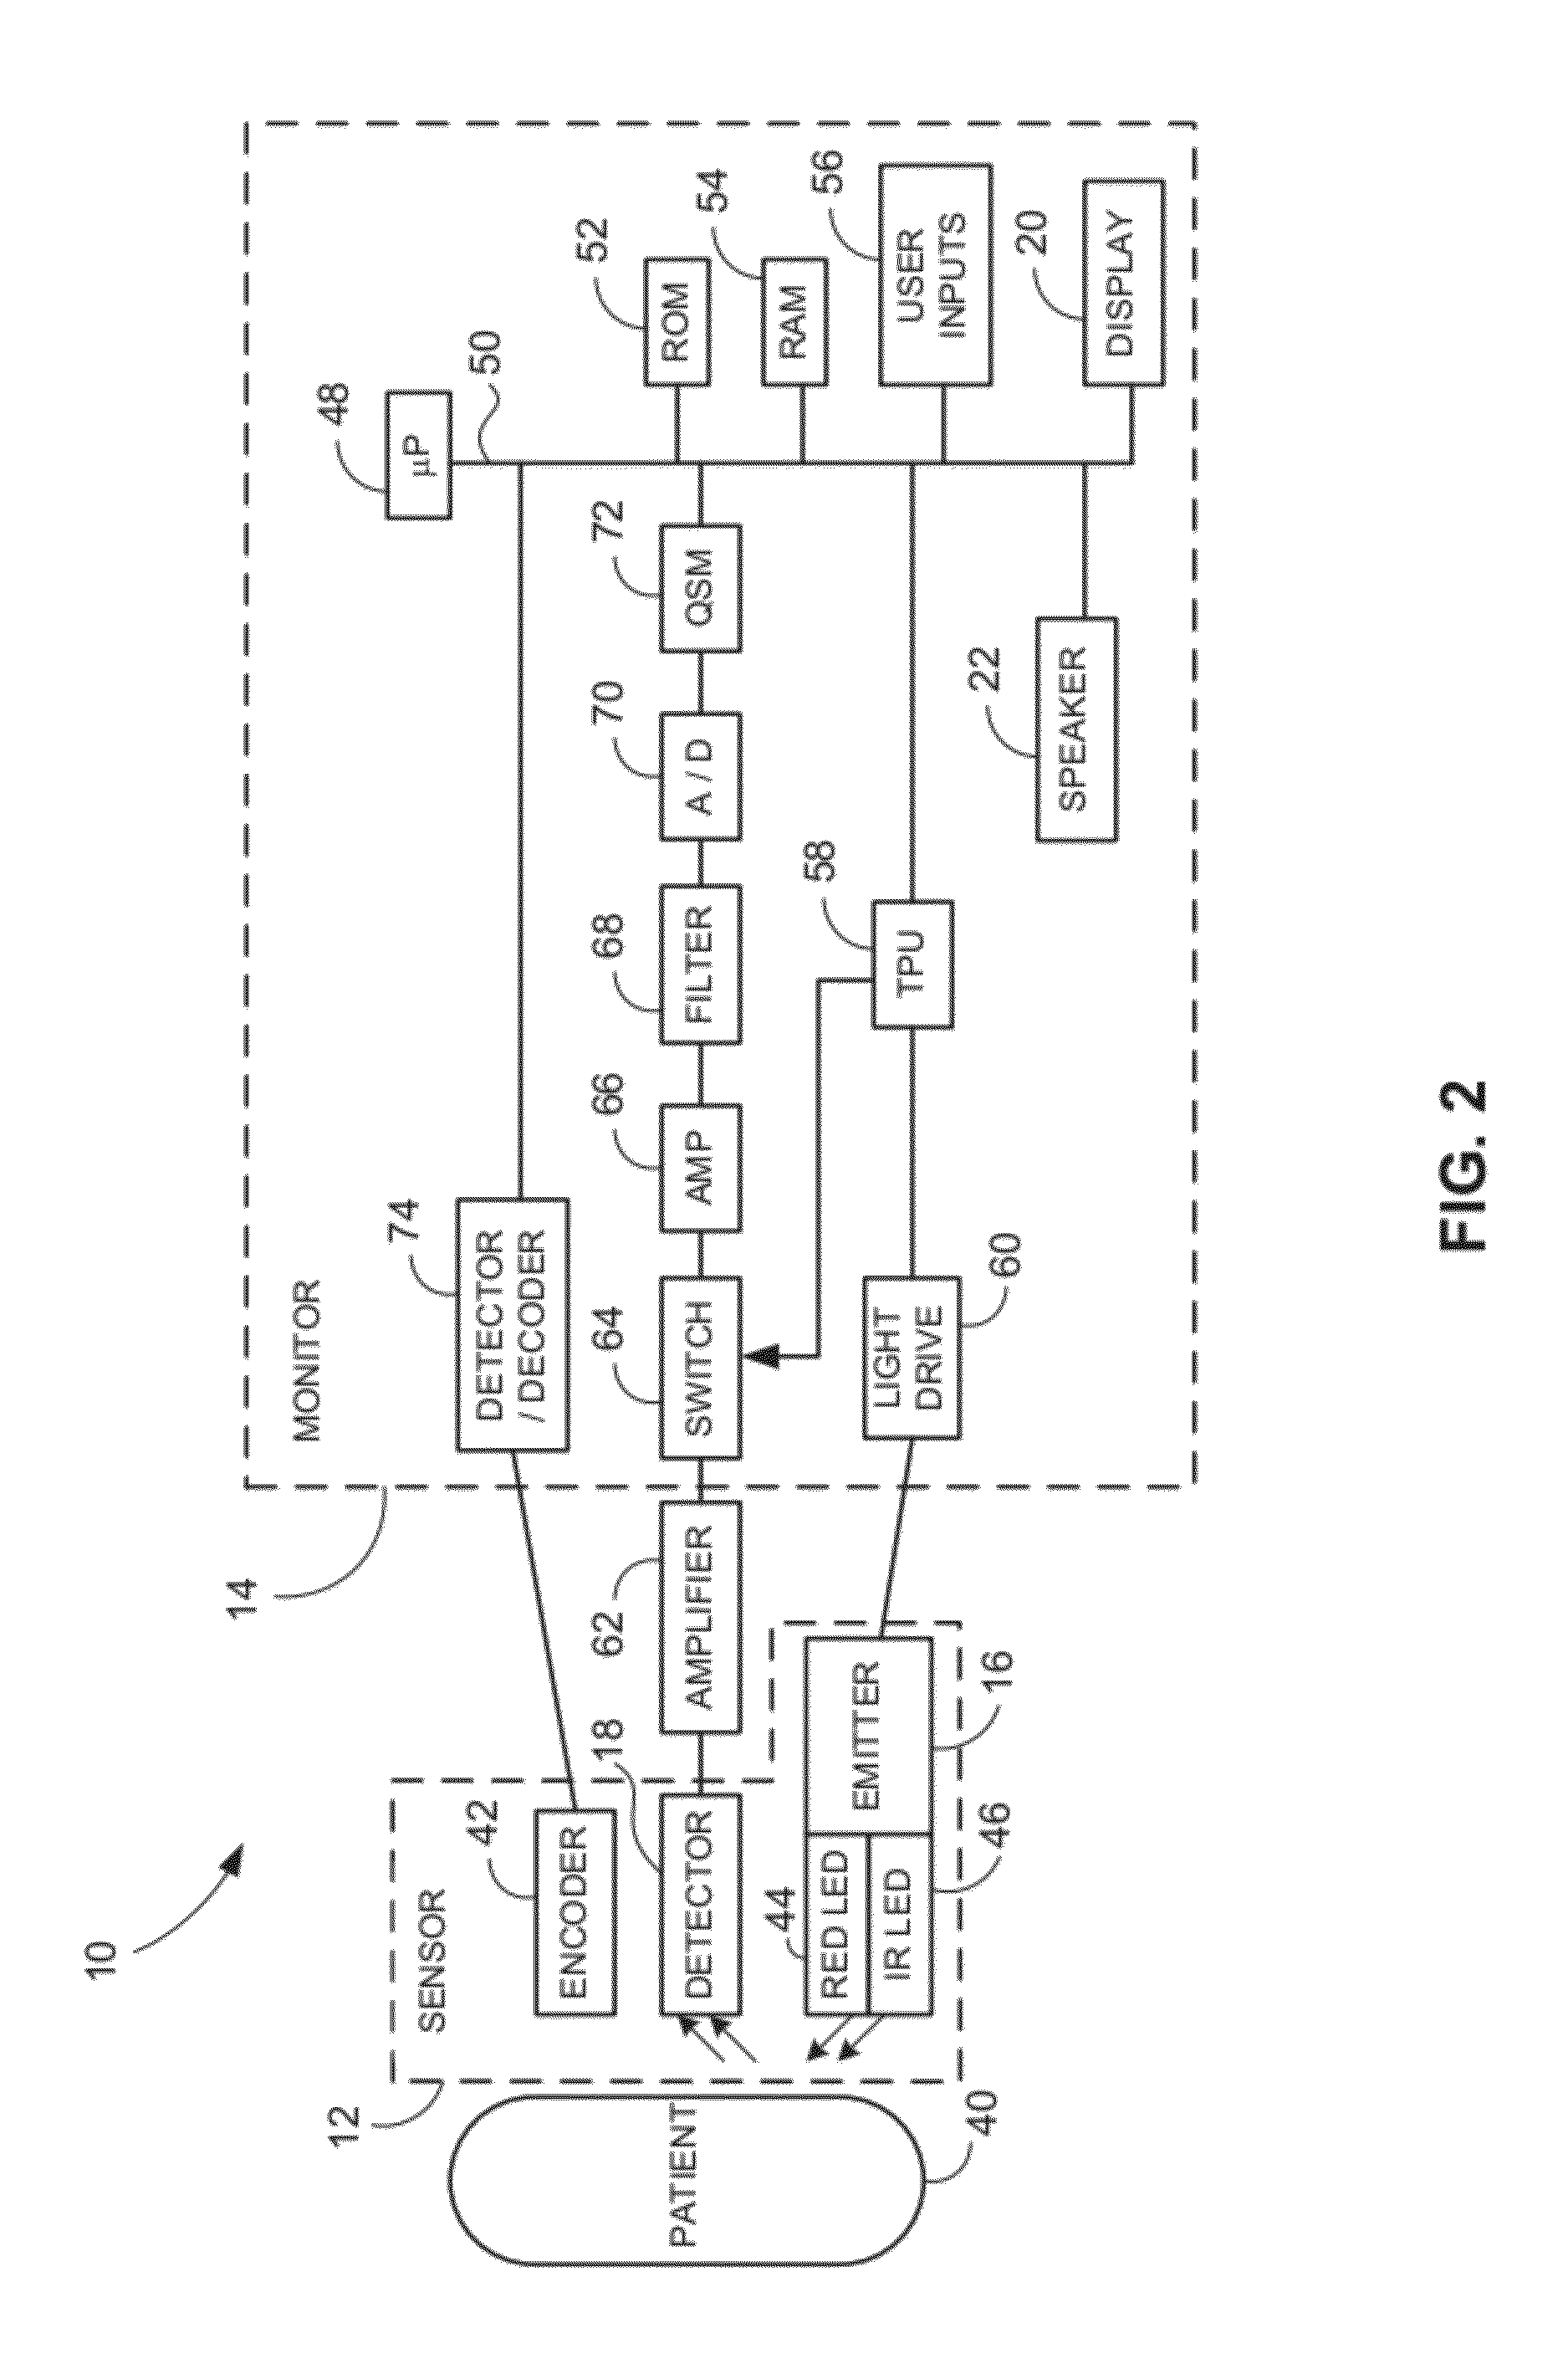 Systems and methods for detecting and monitoring arrhythmias using the PPG